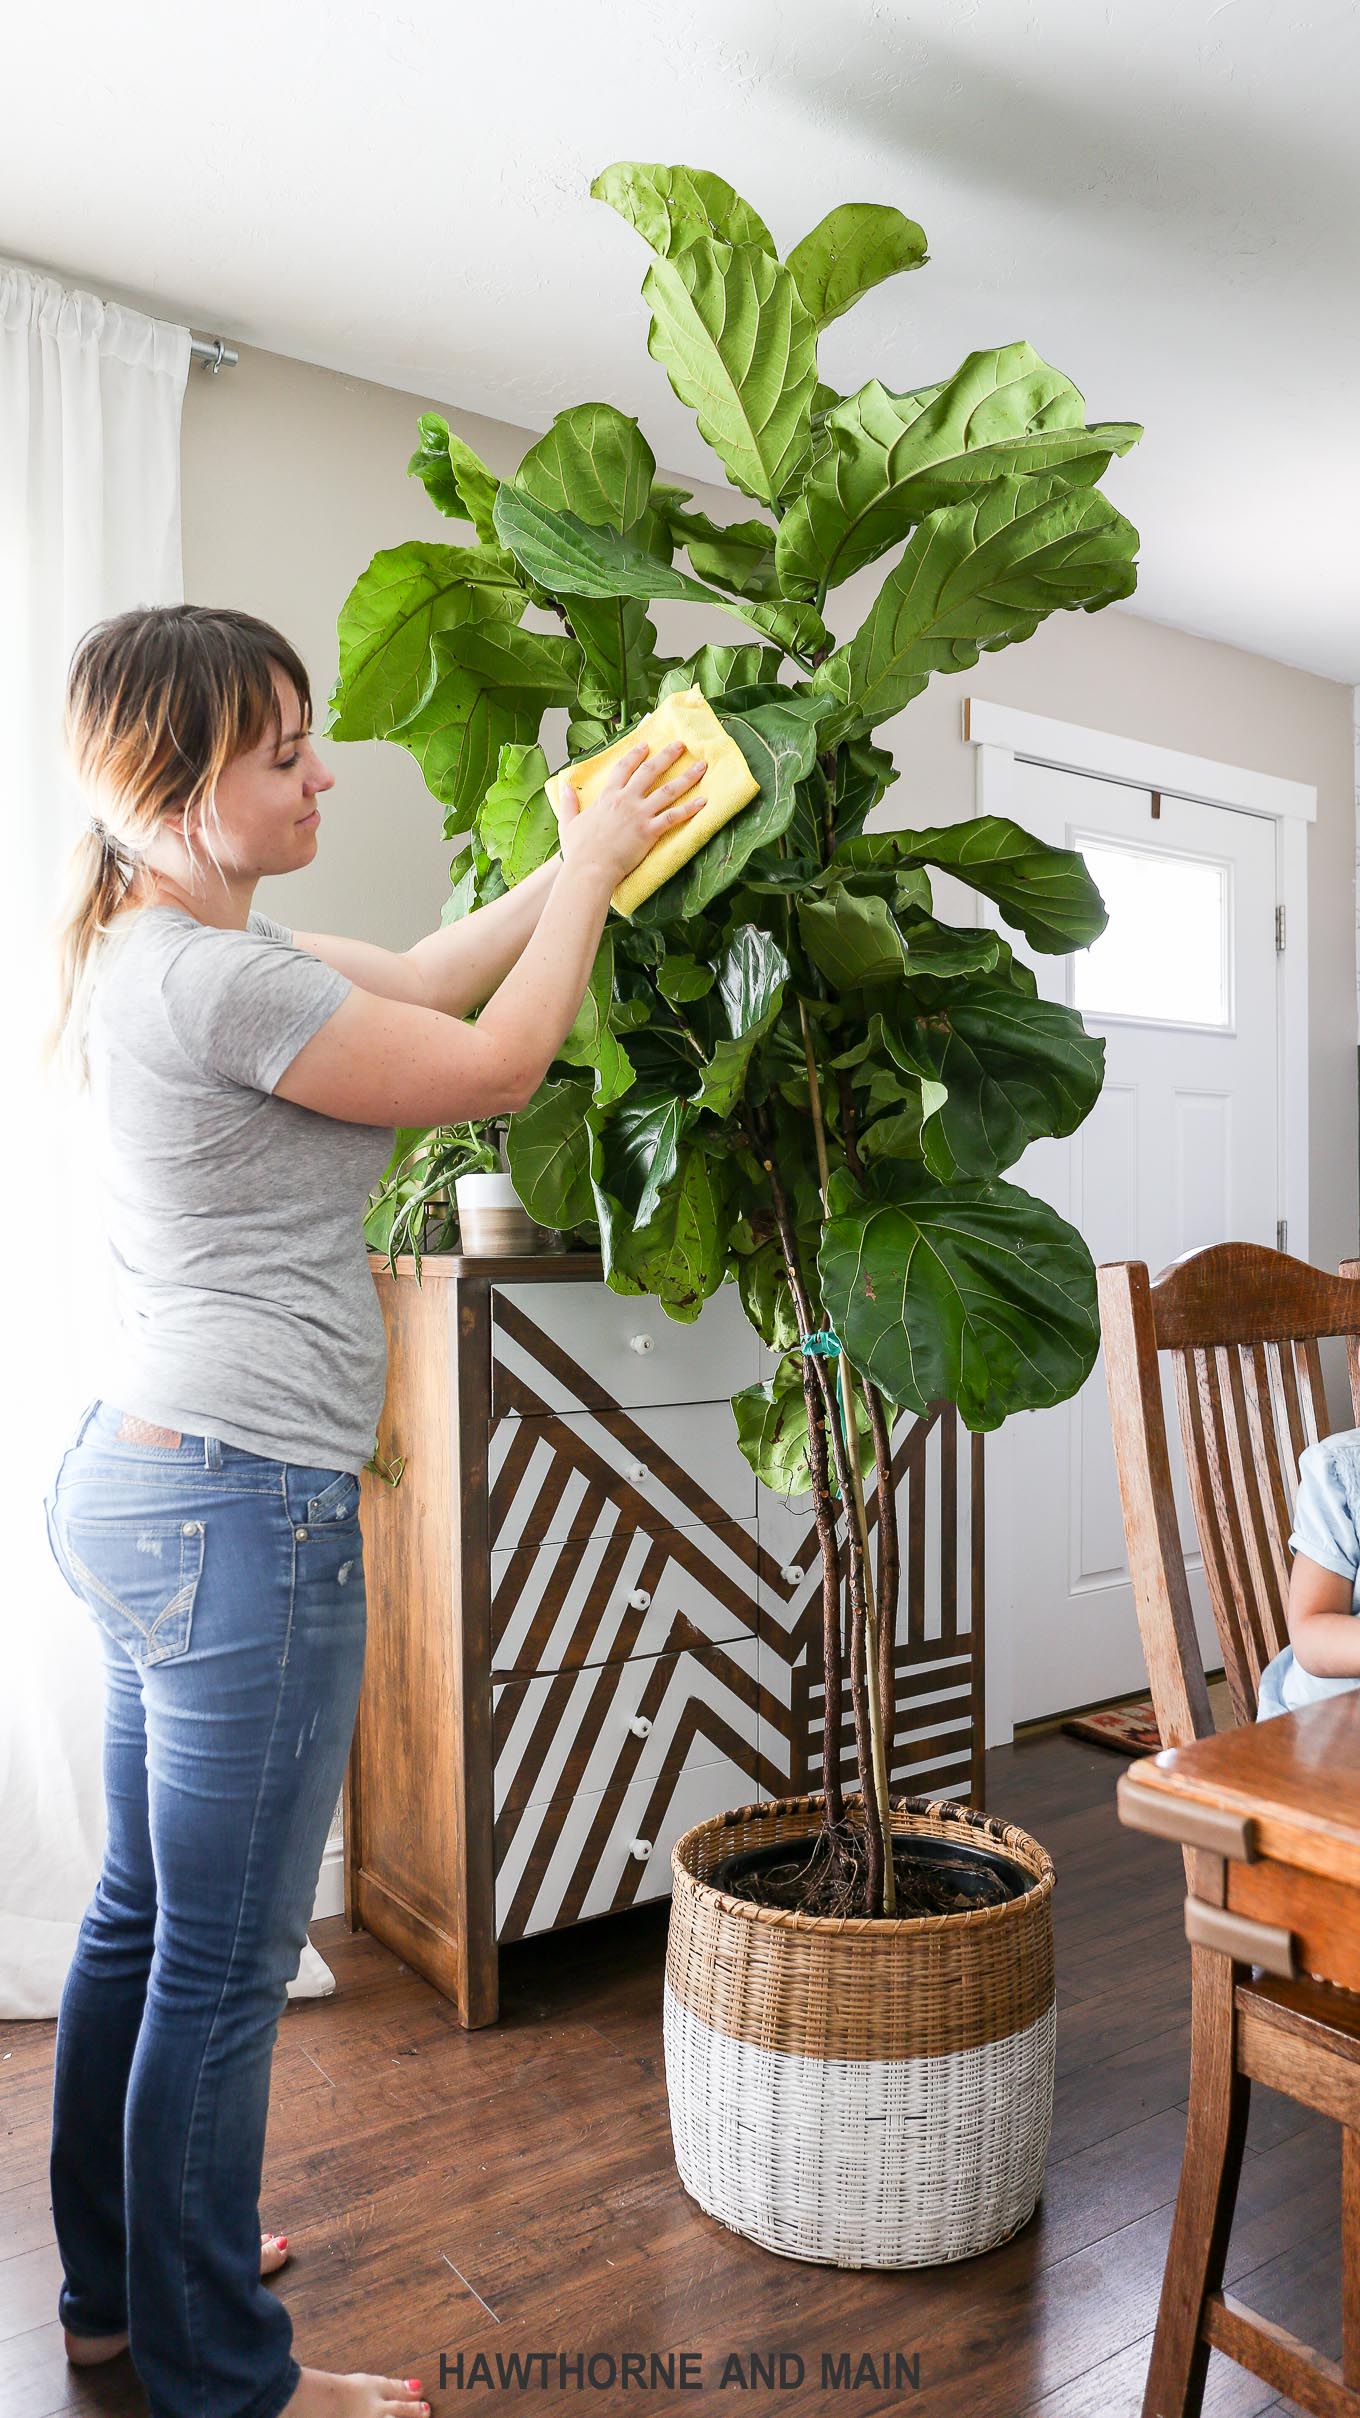 How to Care for Fiddle Leaf Fig Tree – HAWTHORNE MAIN